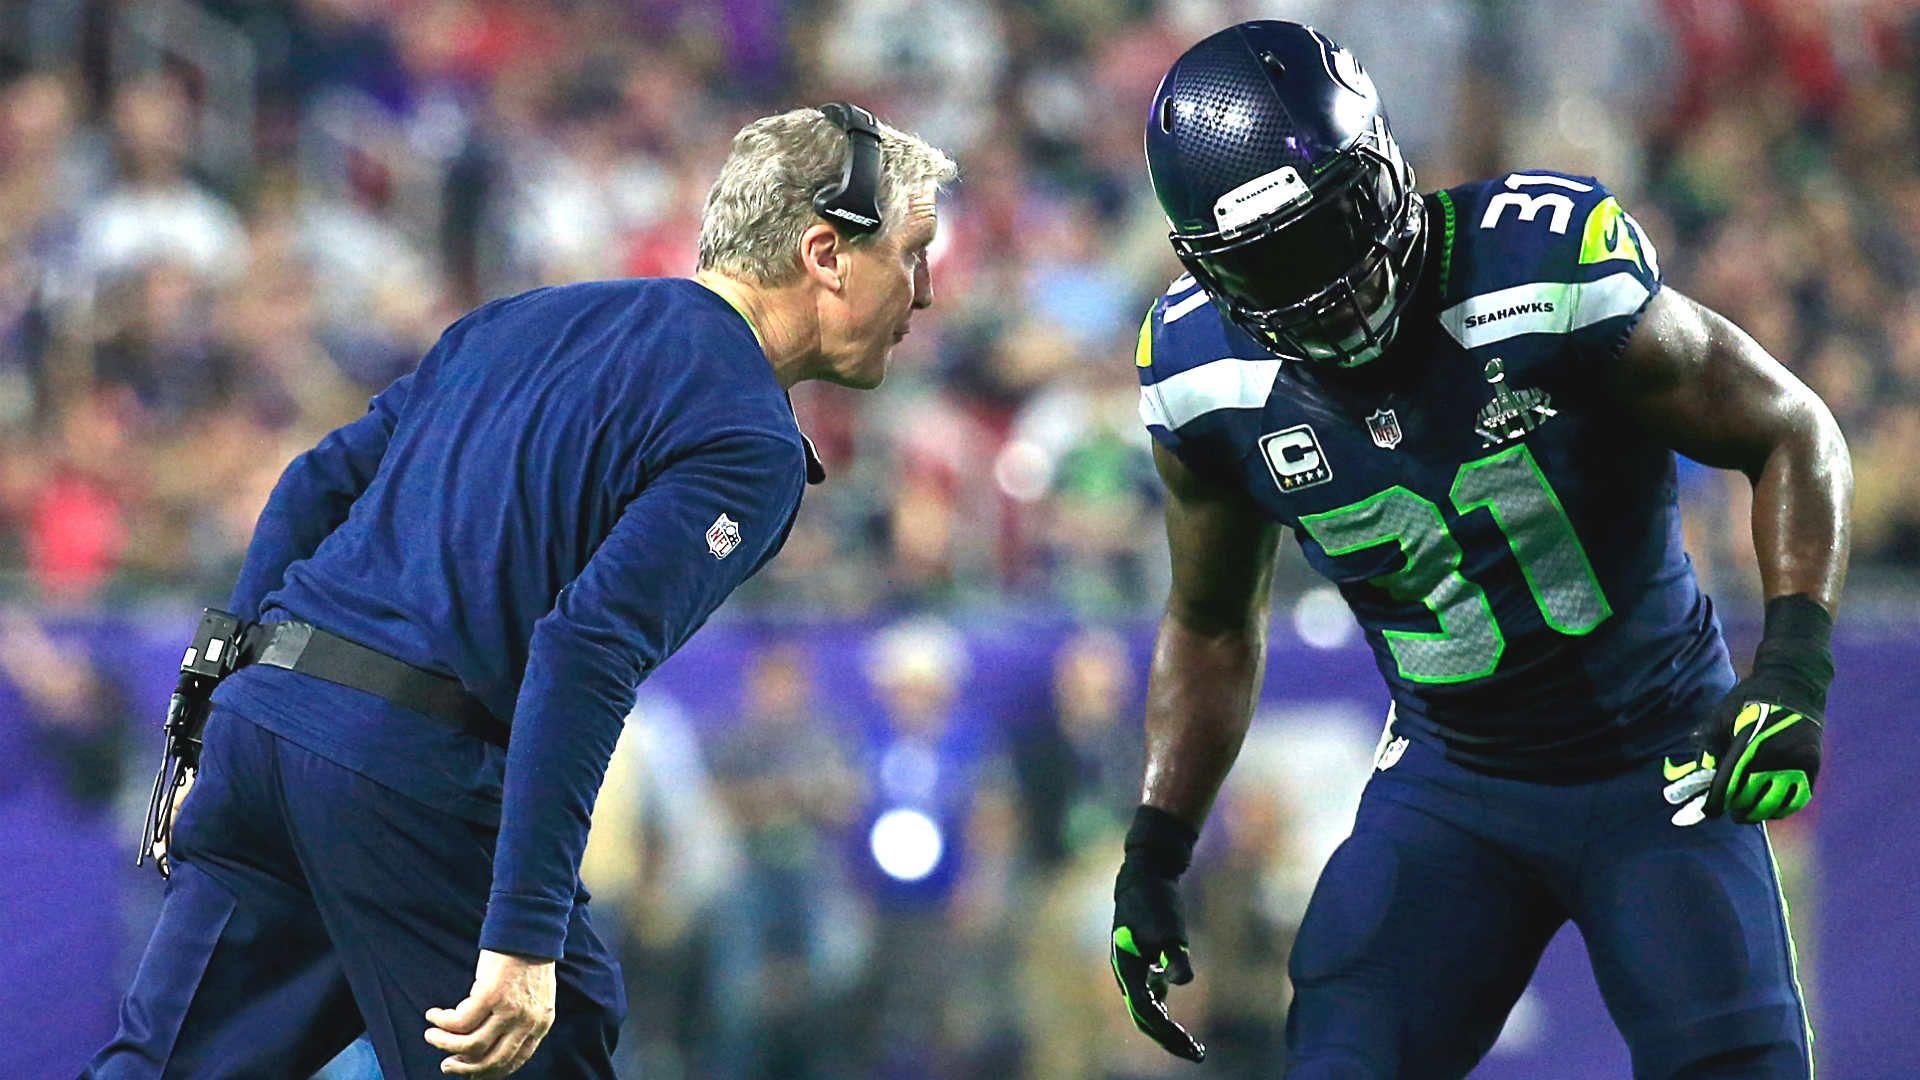 Kam Chancellor will play Sunday against Bears, says Pete Carroll